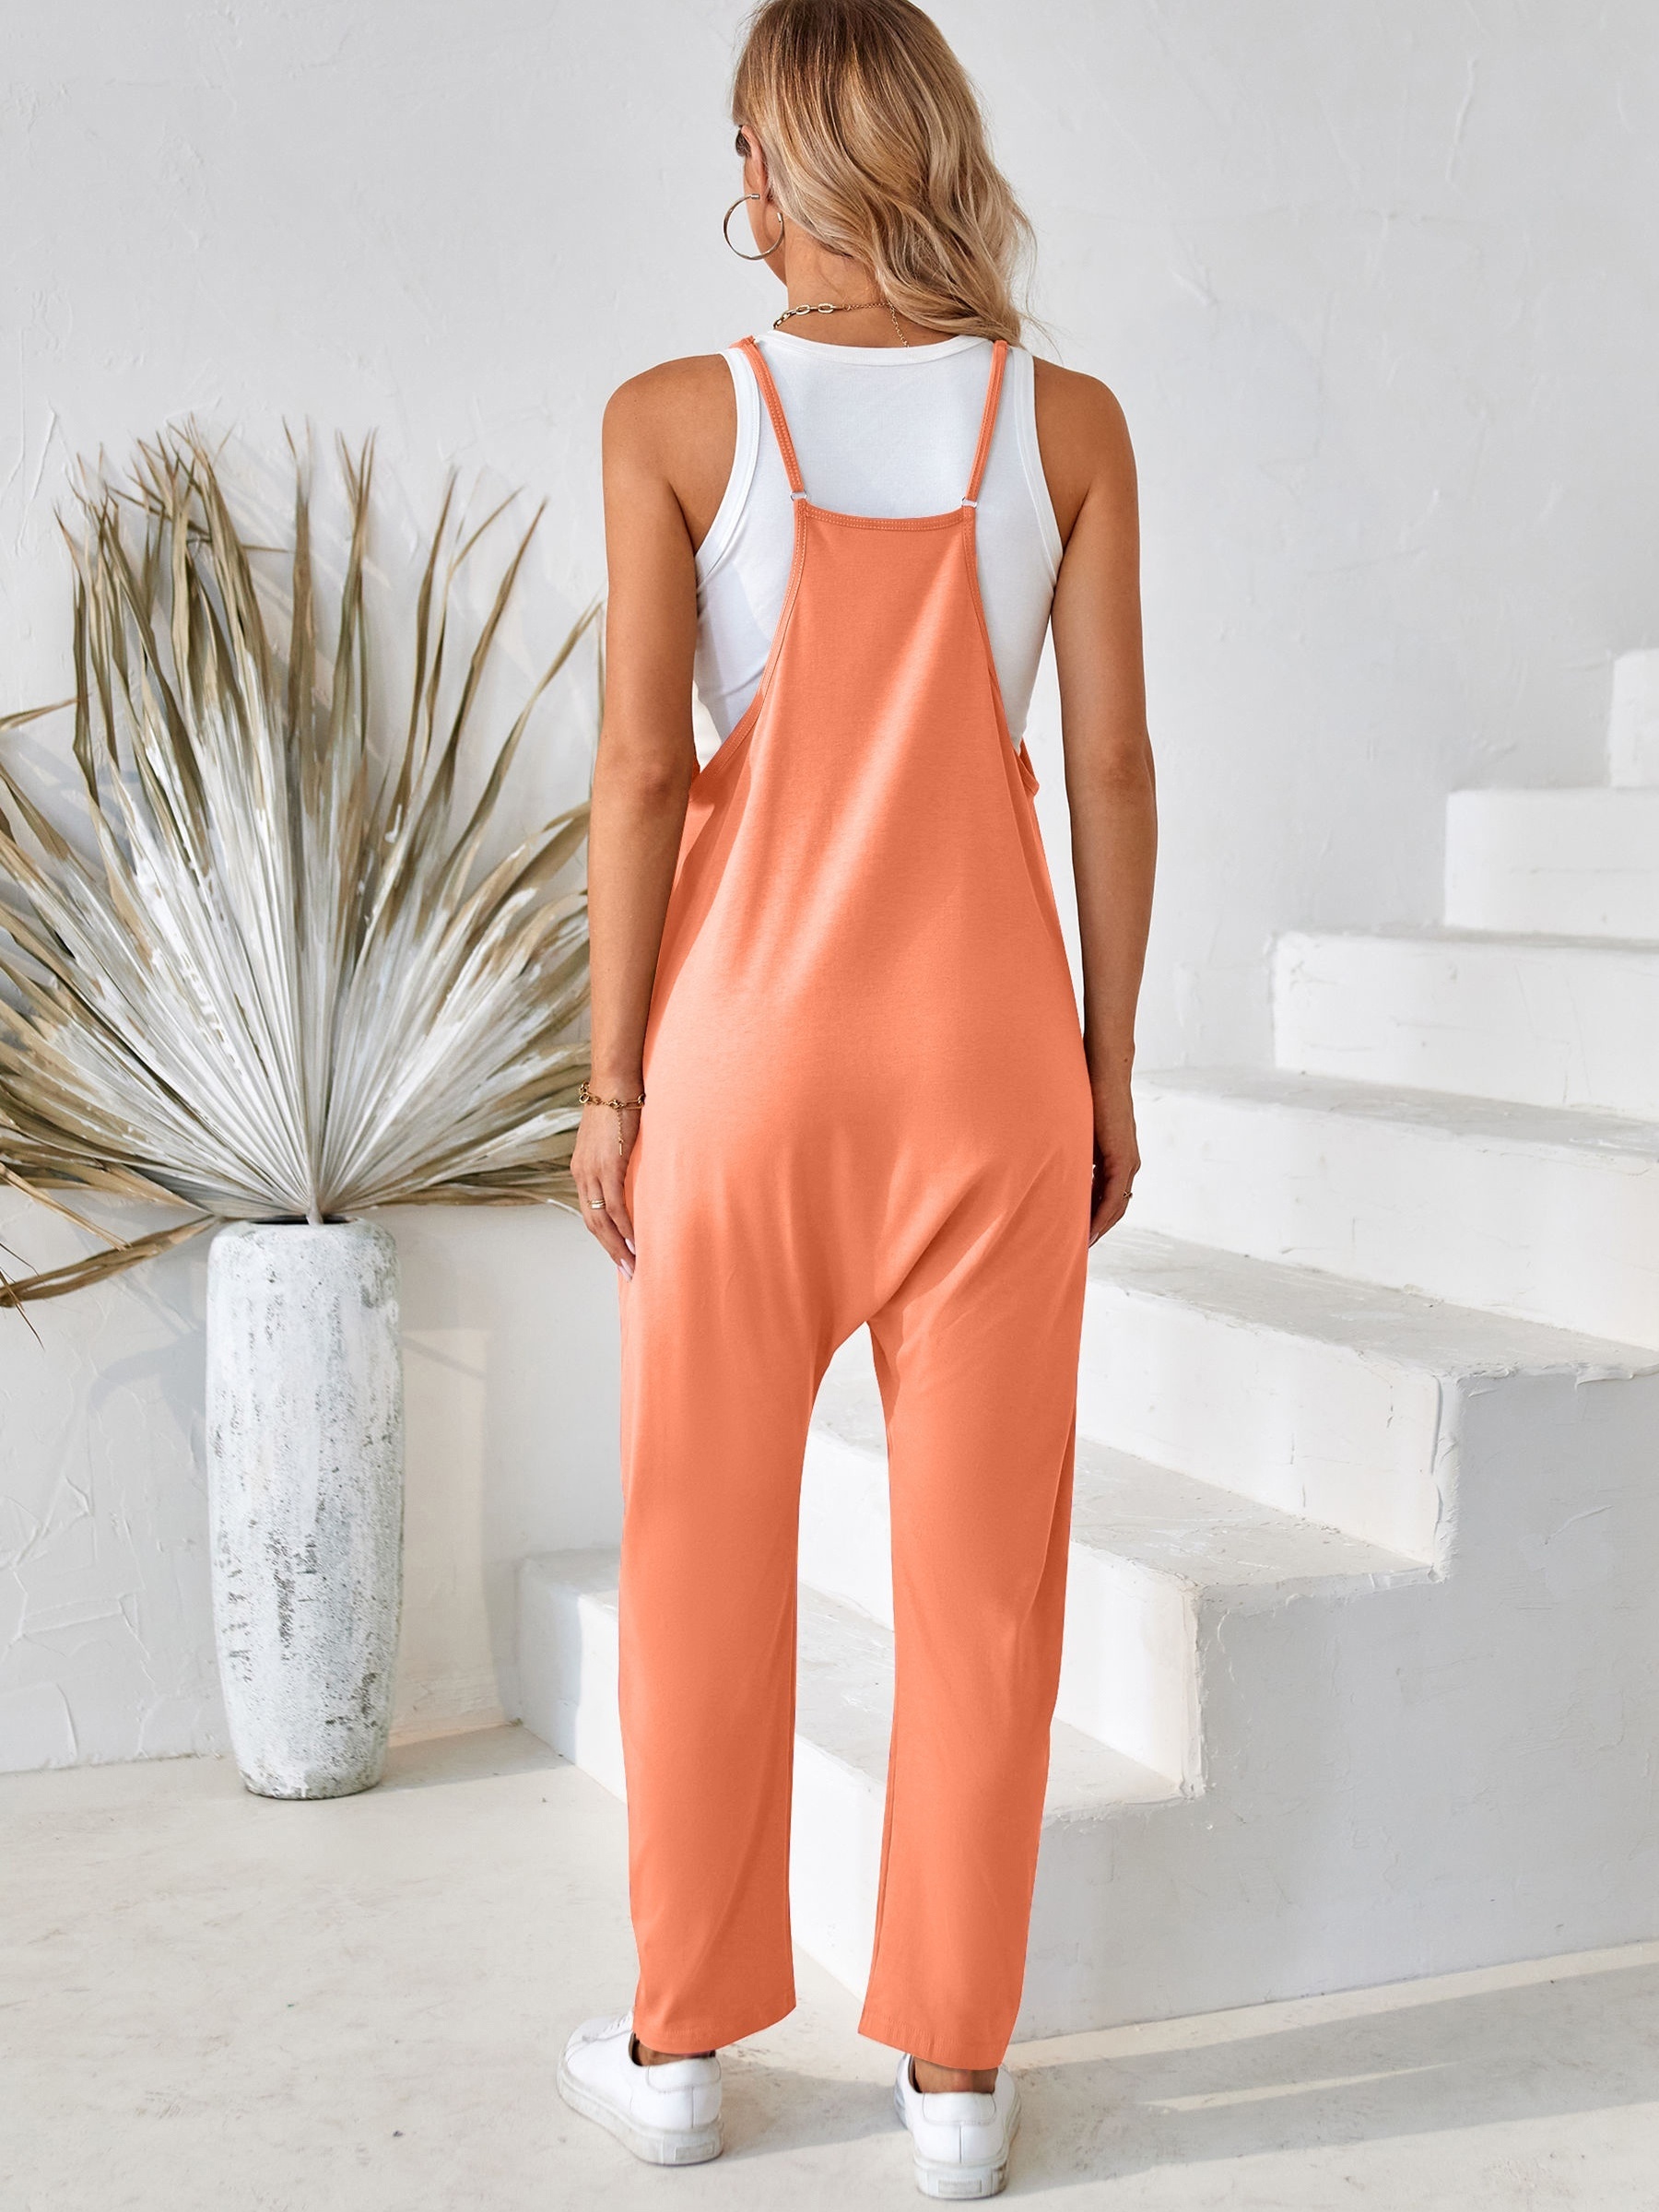 QIPOPIQ Clearance Women's Jumpsuits Sleeveless Summer Solid Camis